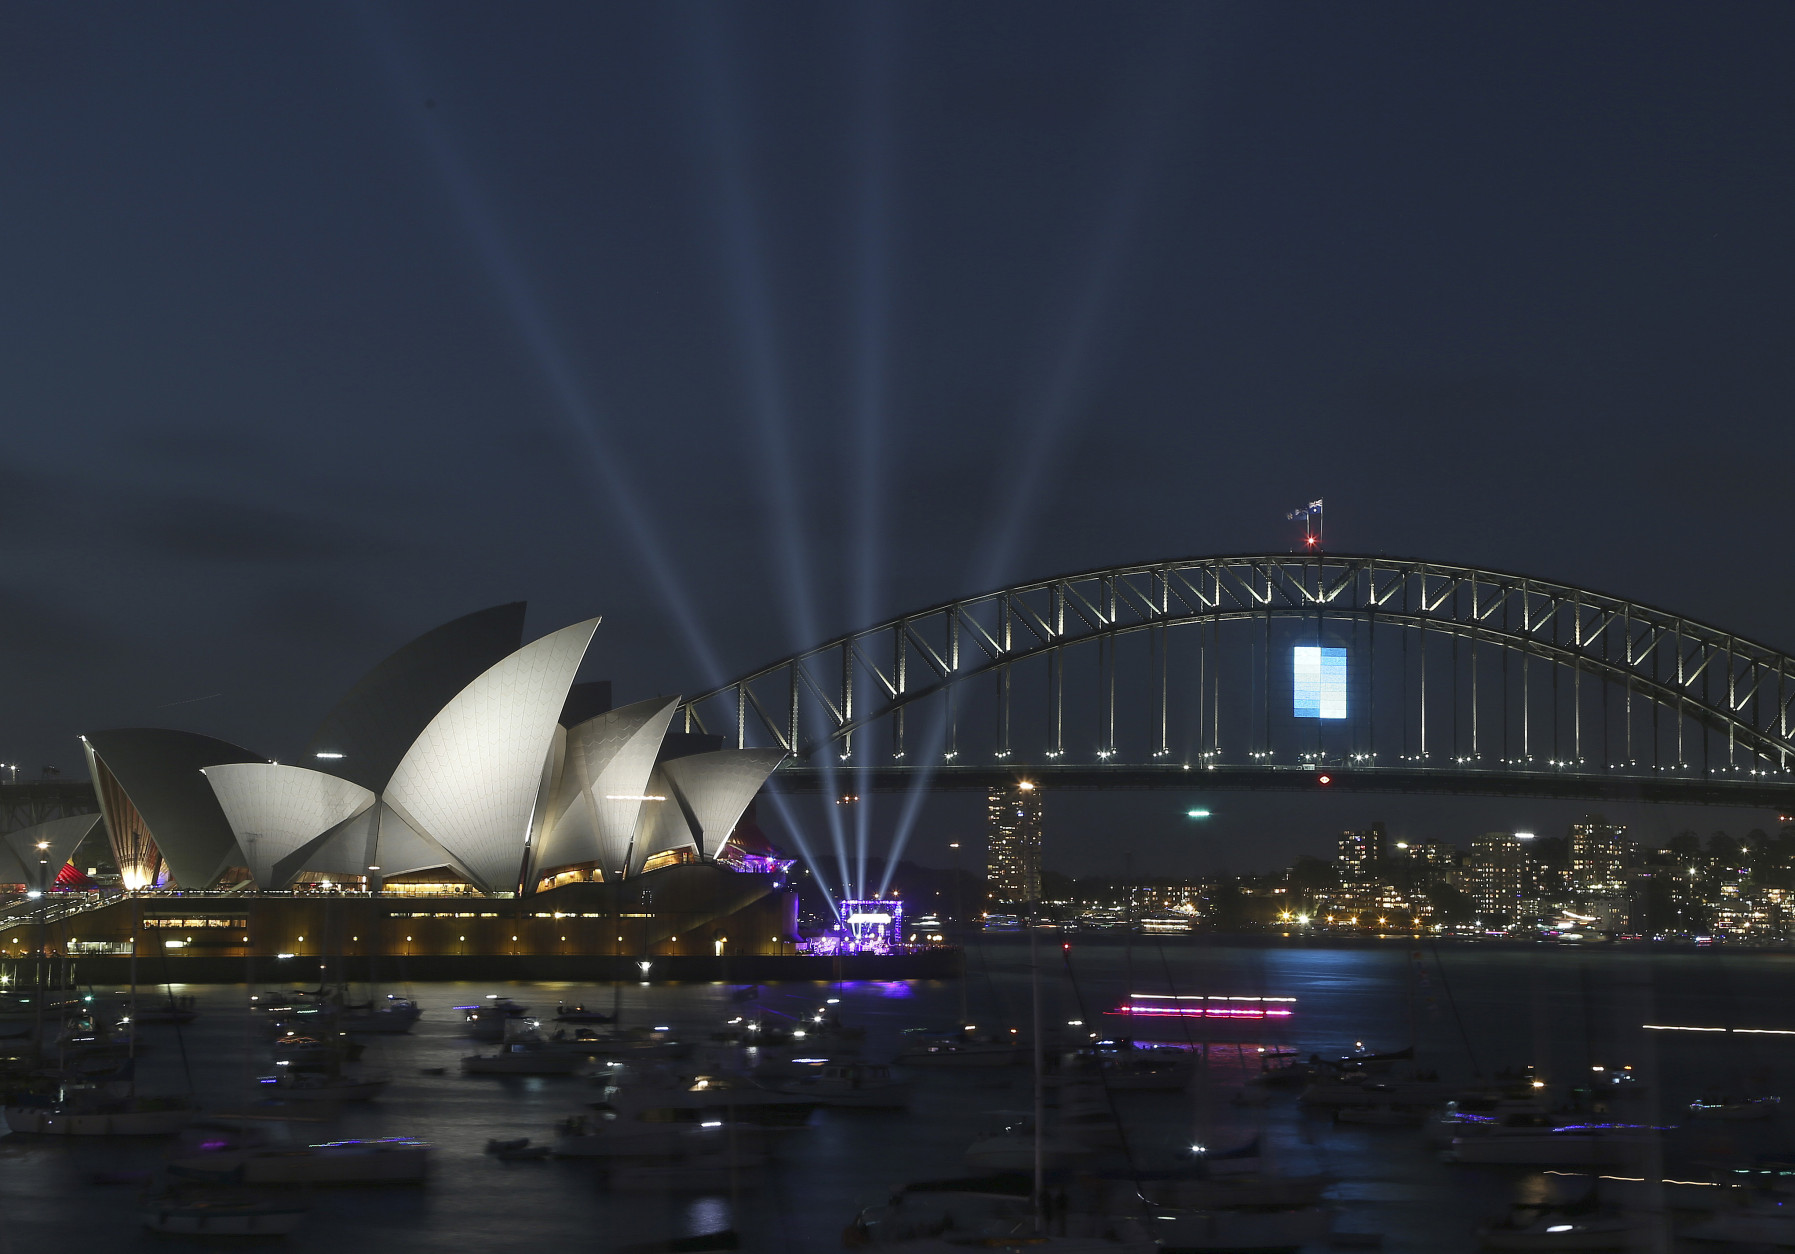 The Sydney Opera House and the Harbour Bridge are seen during New Years Eve celebrations in Sydney, Australia, Wednesday, Dec. 31, 2014. Thousands of people crammed into Lady Macquaries Chair to watch the annual fireworks show. (AP Photo/Rob Griffith)